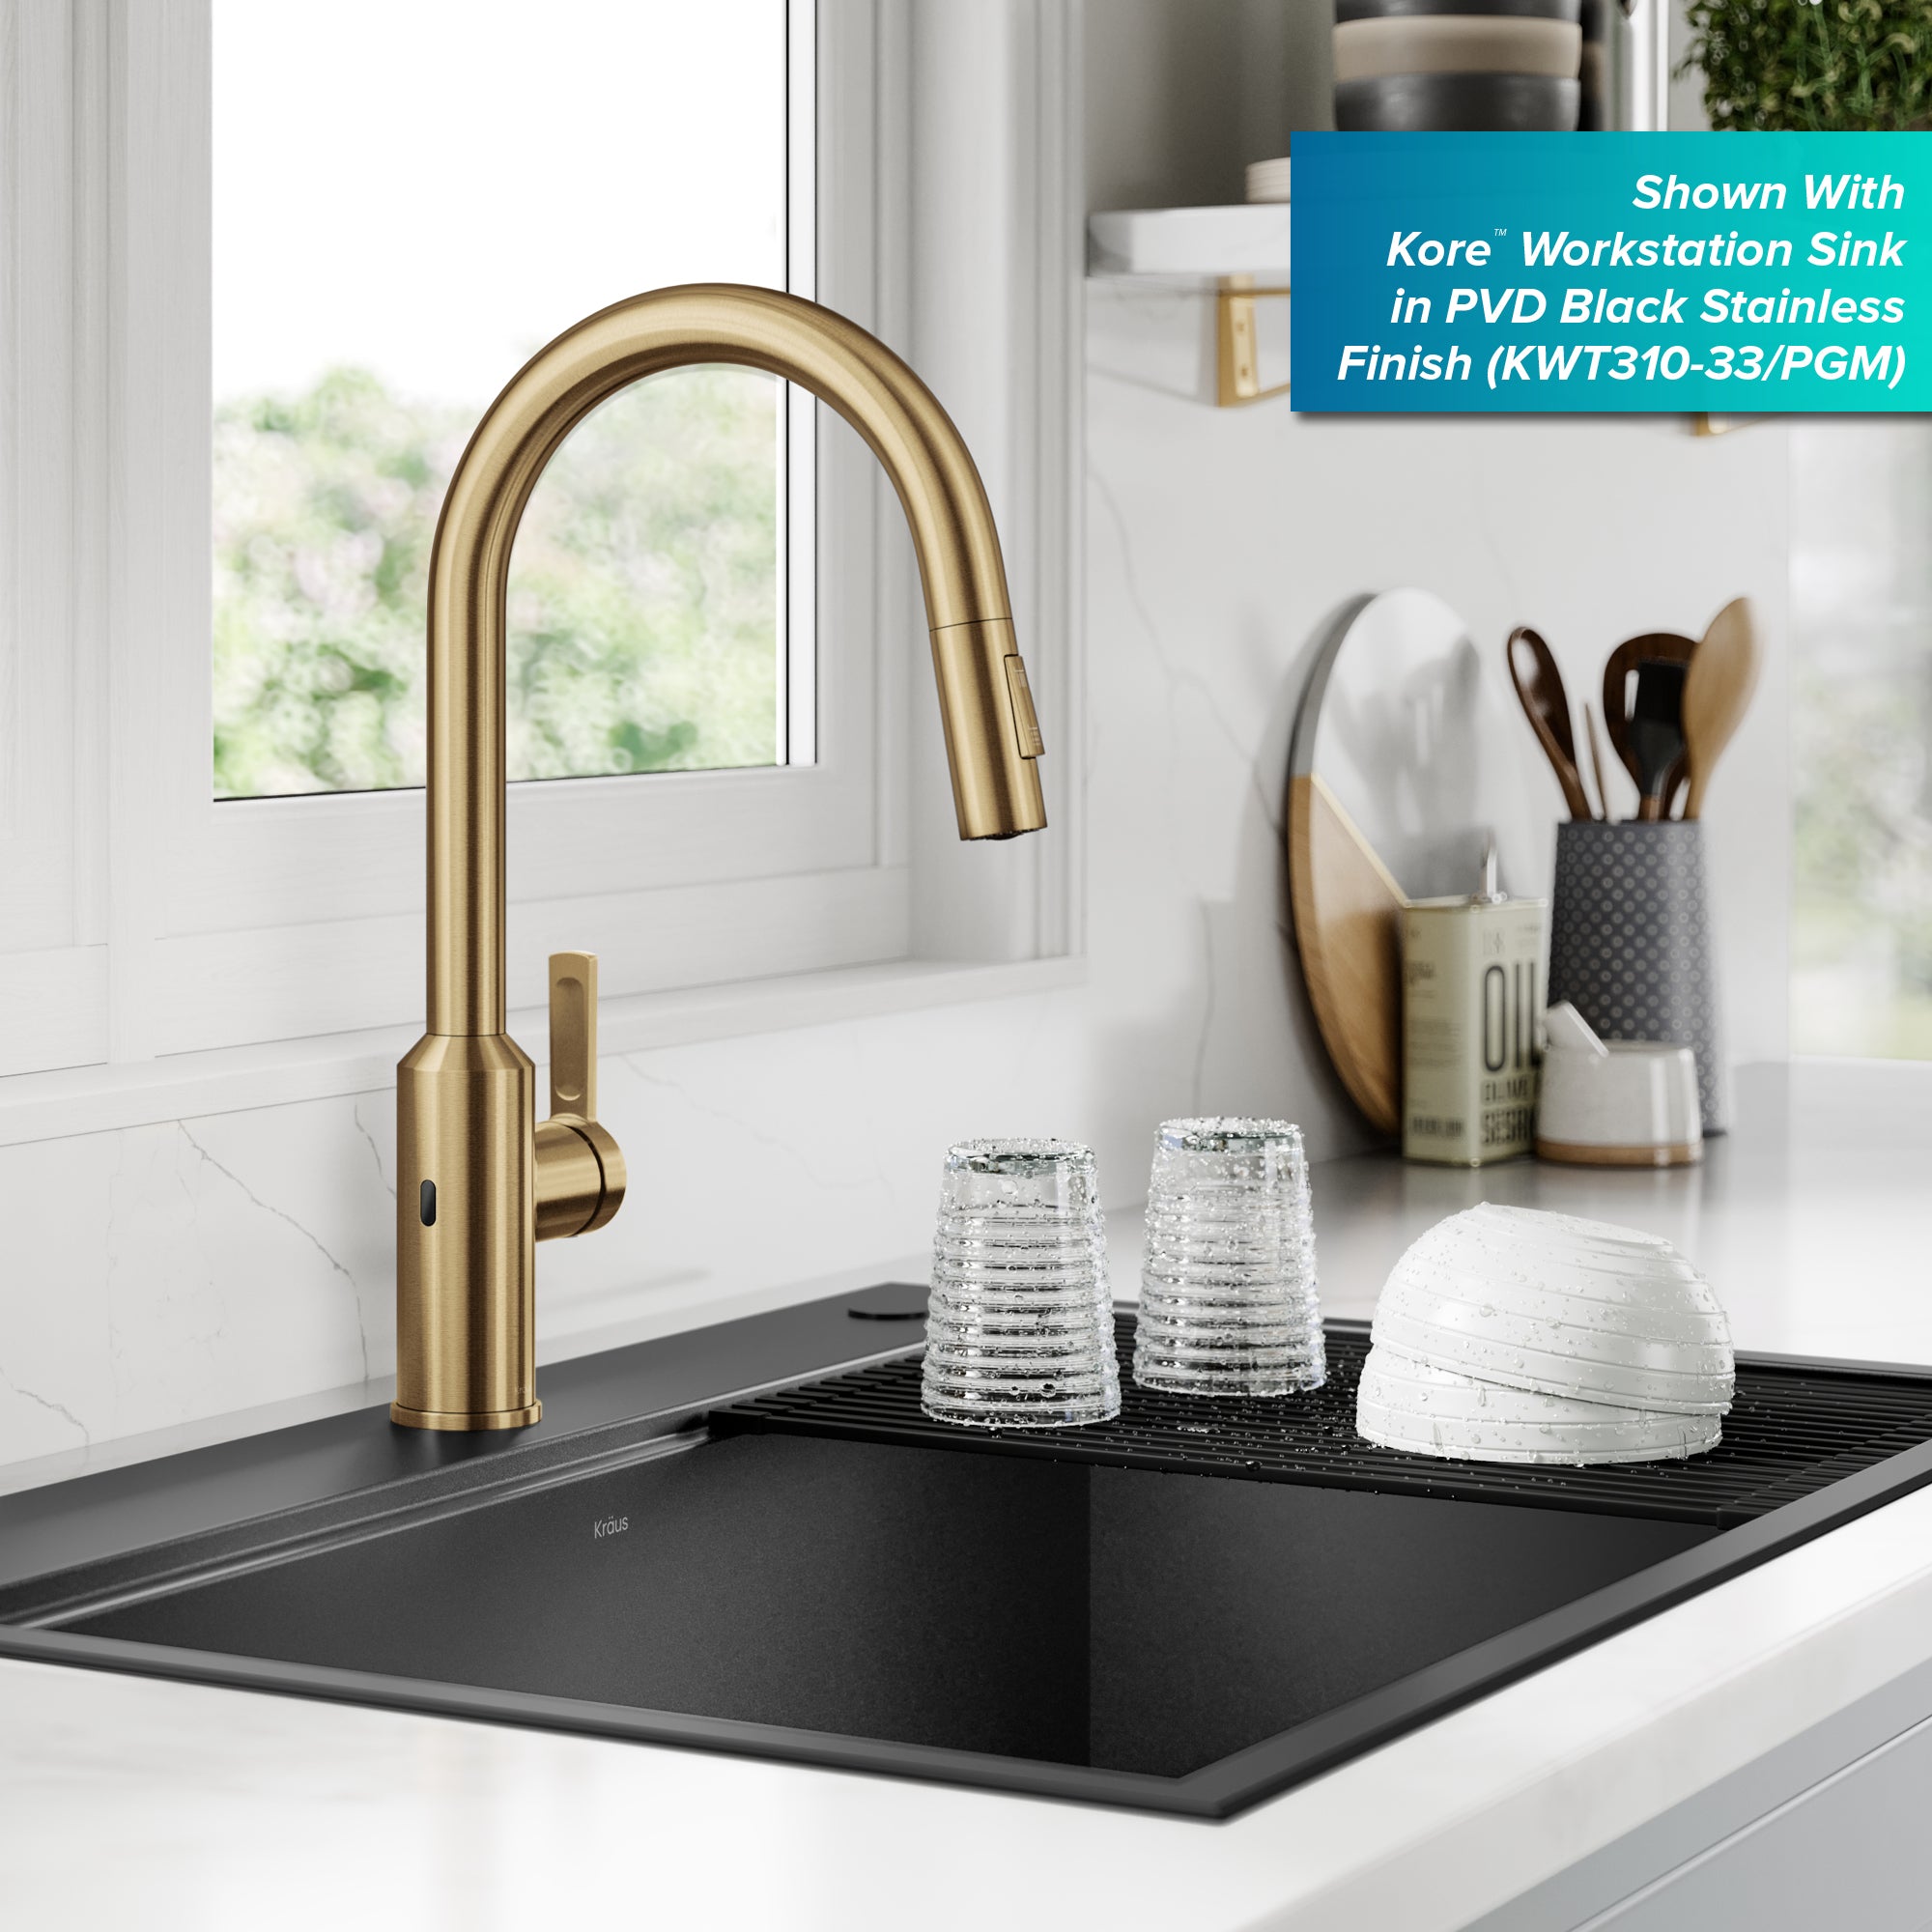 KRAUS Oletto Touchless Pull-Down Kitchen Faucet in Brushed Brass